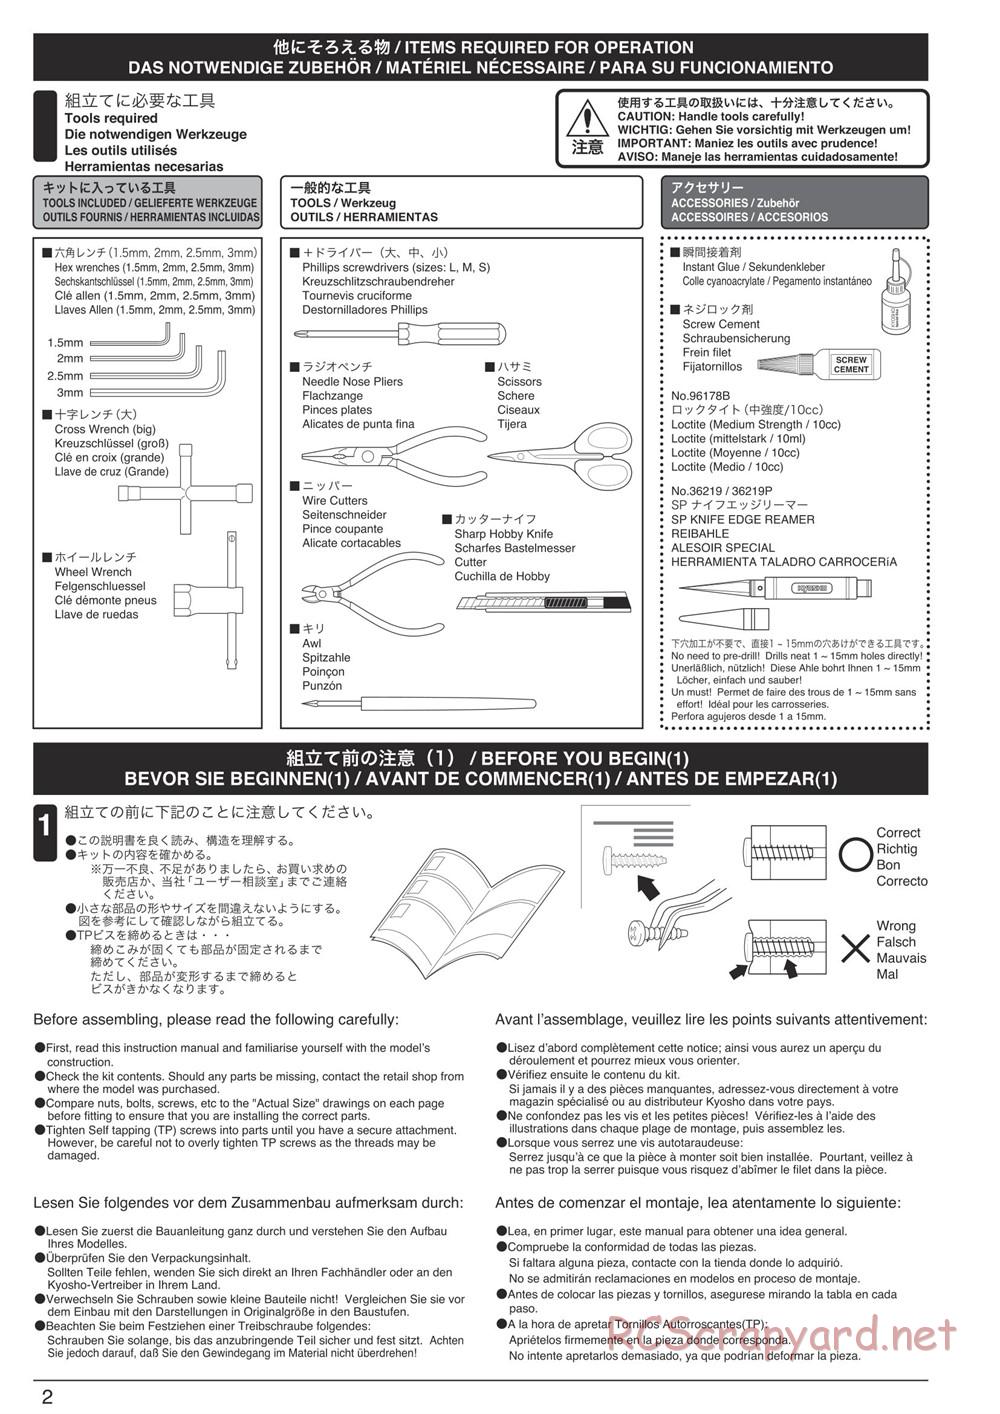 Kyosho - FO-XX VE 2.0 - Manual - Page 2